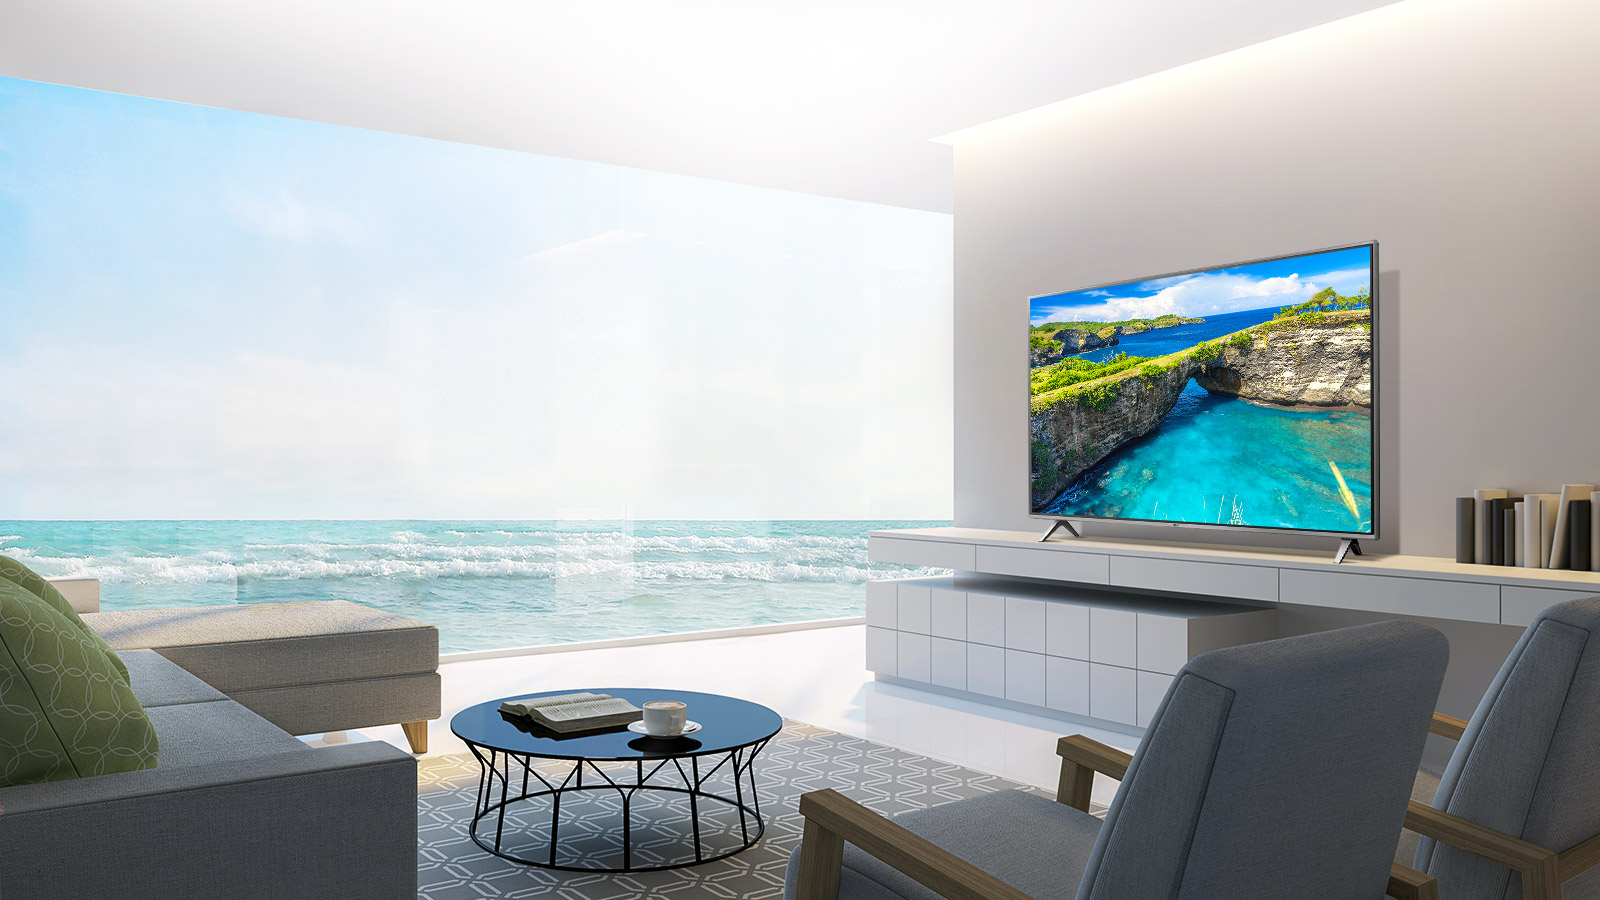 LG TV's - Sophisticated inside and out